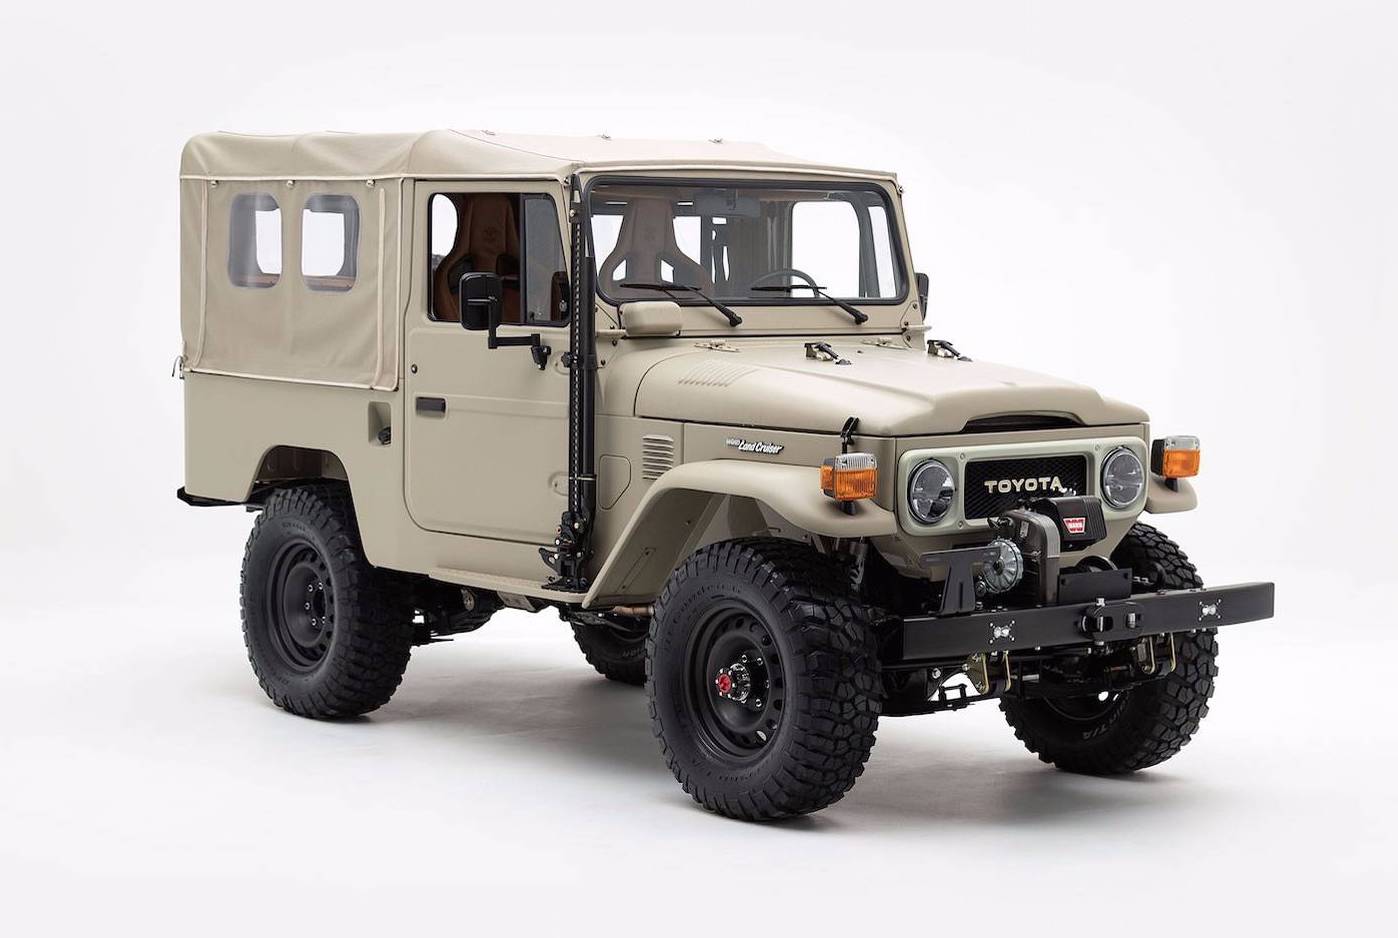 The FJ Company recreates classic with modern V6, 24 being made